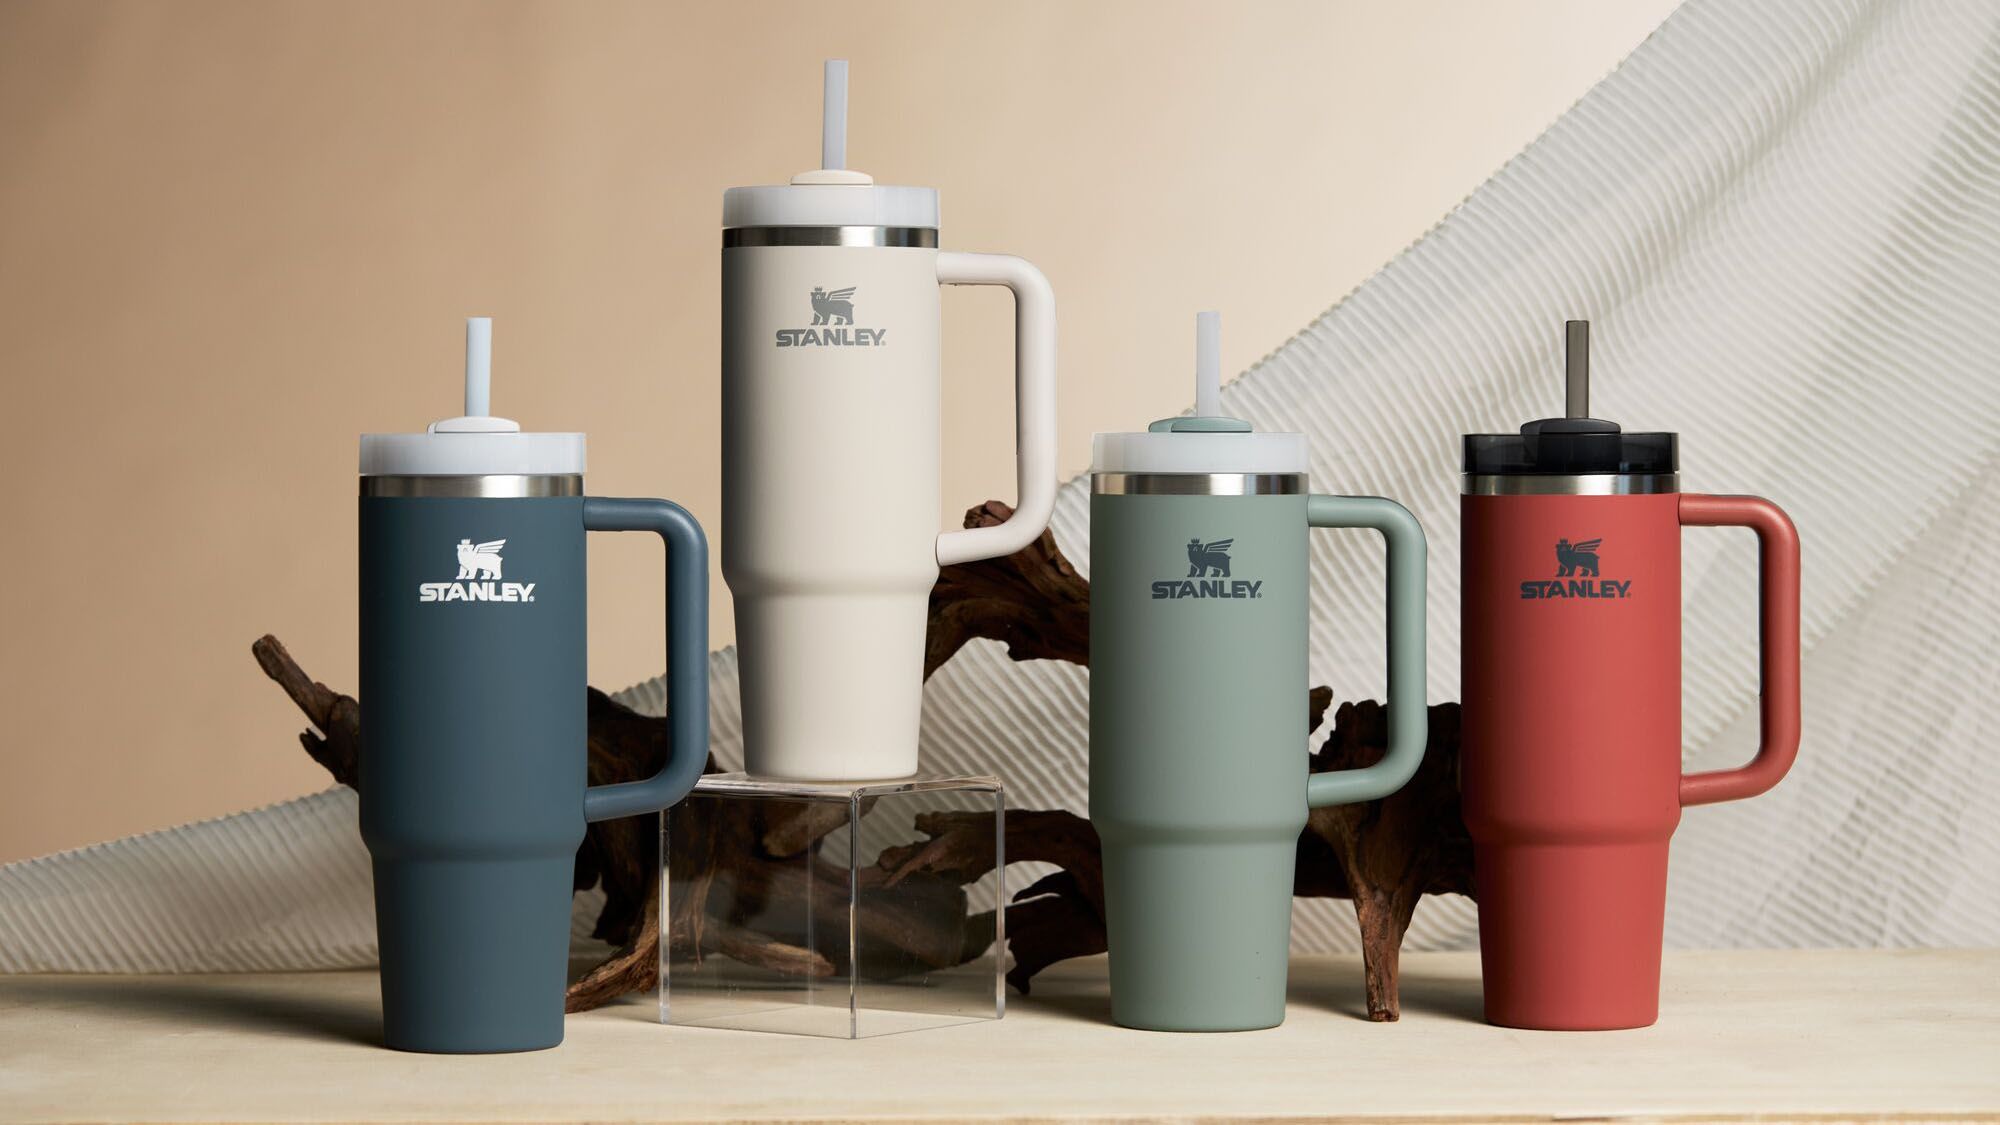 It's Here: The New 30-oz Soft Matte - Stanley